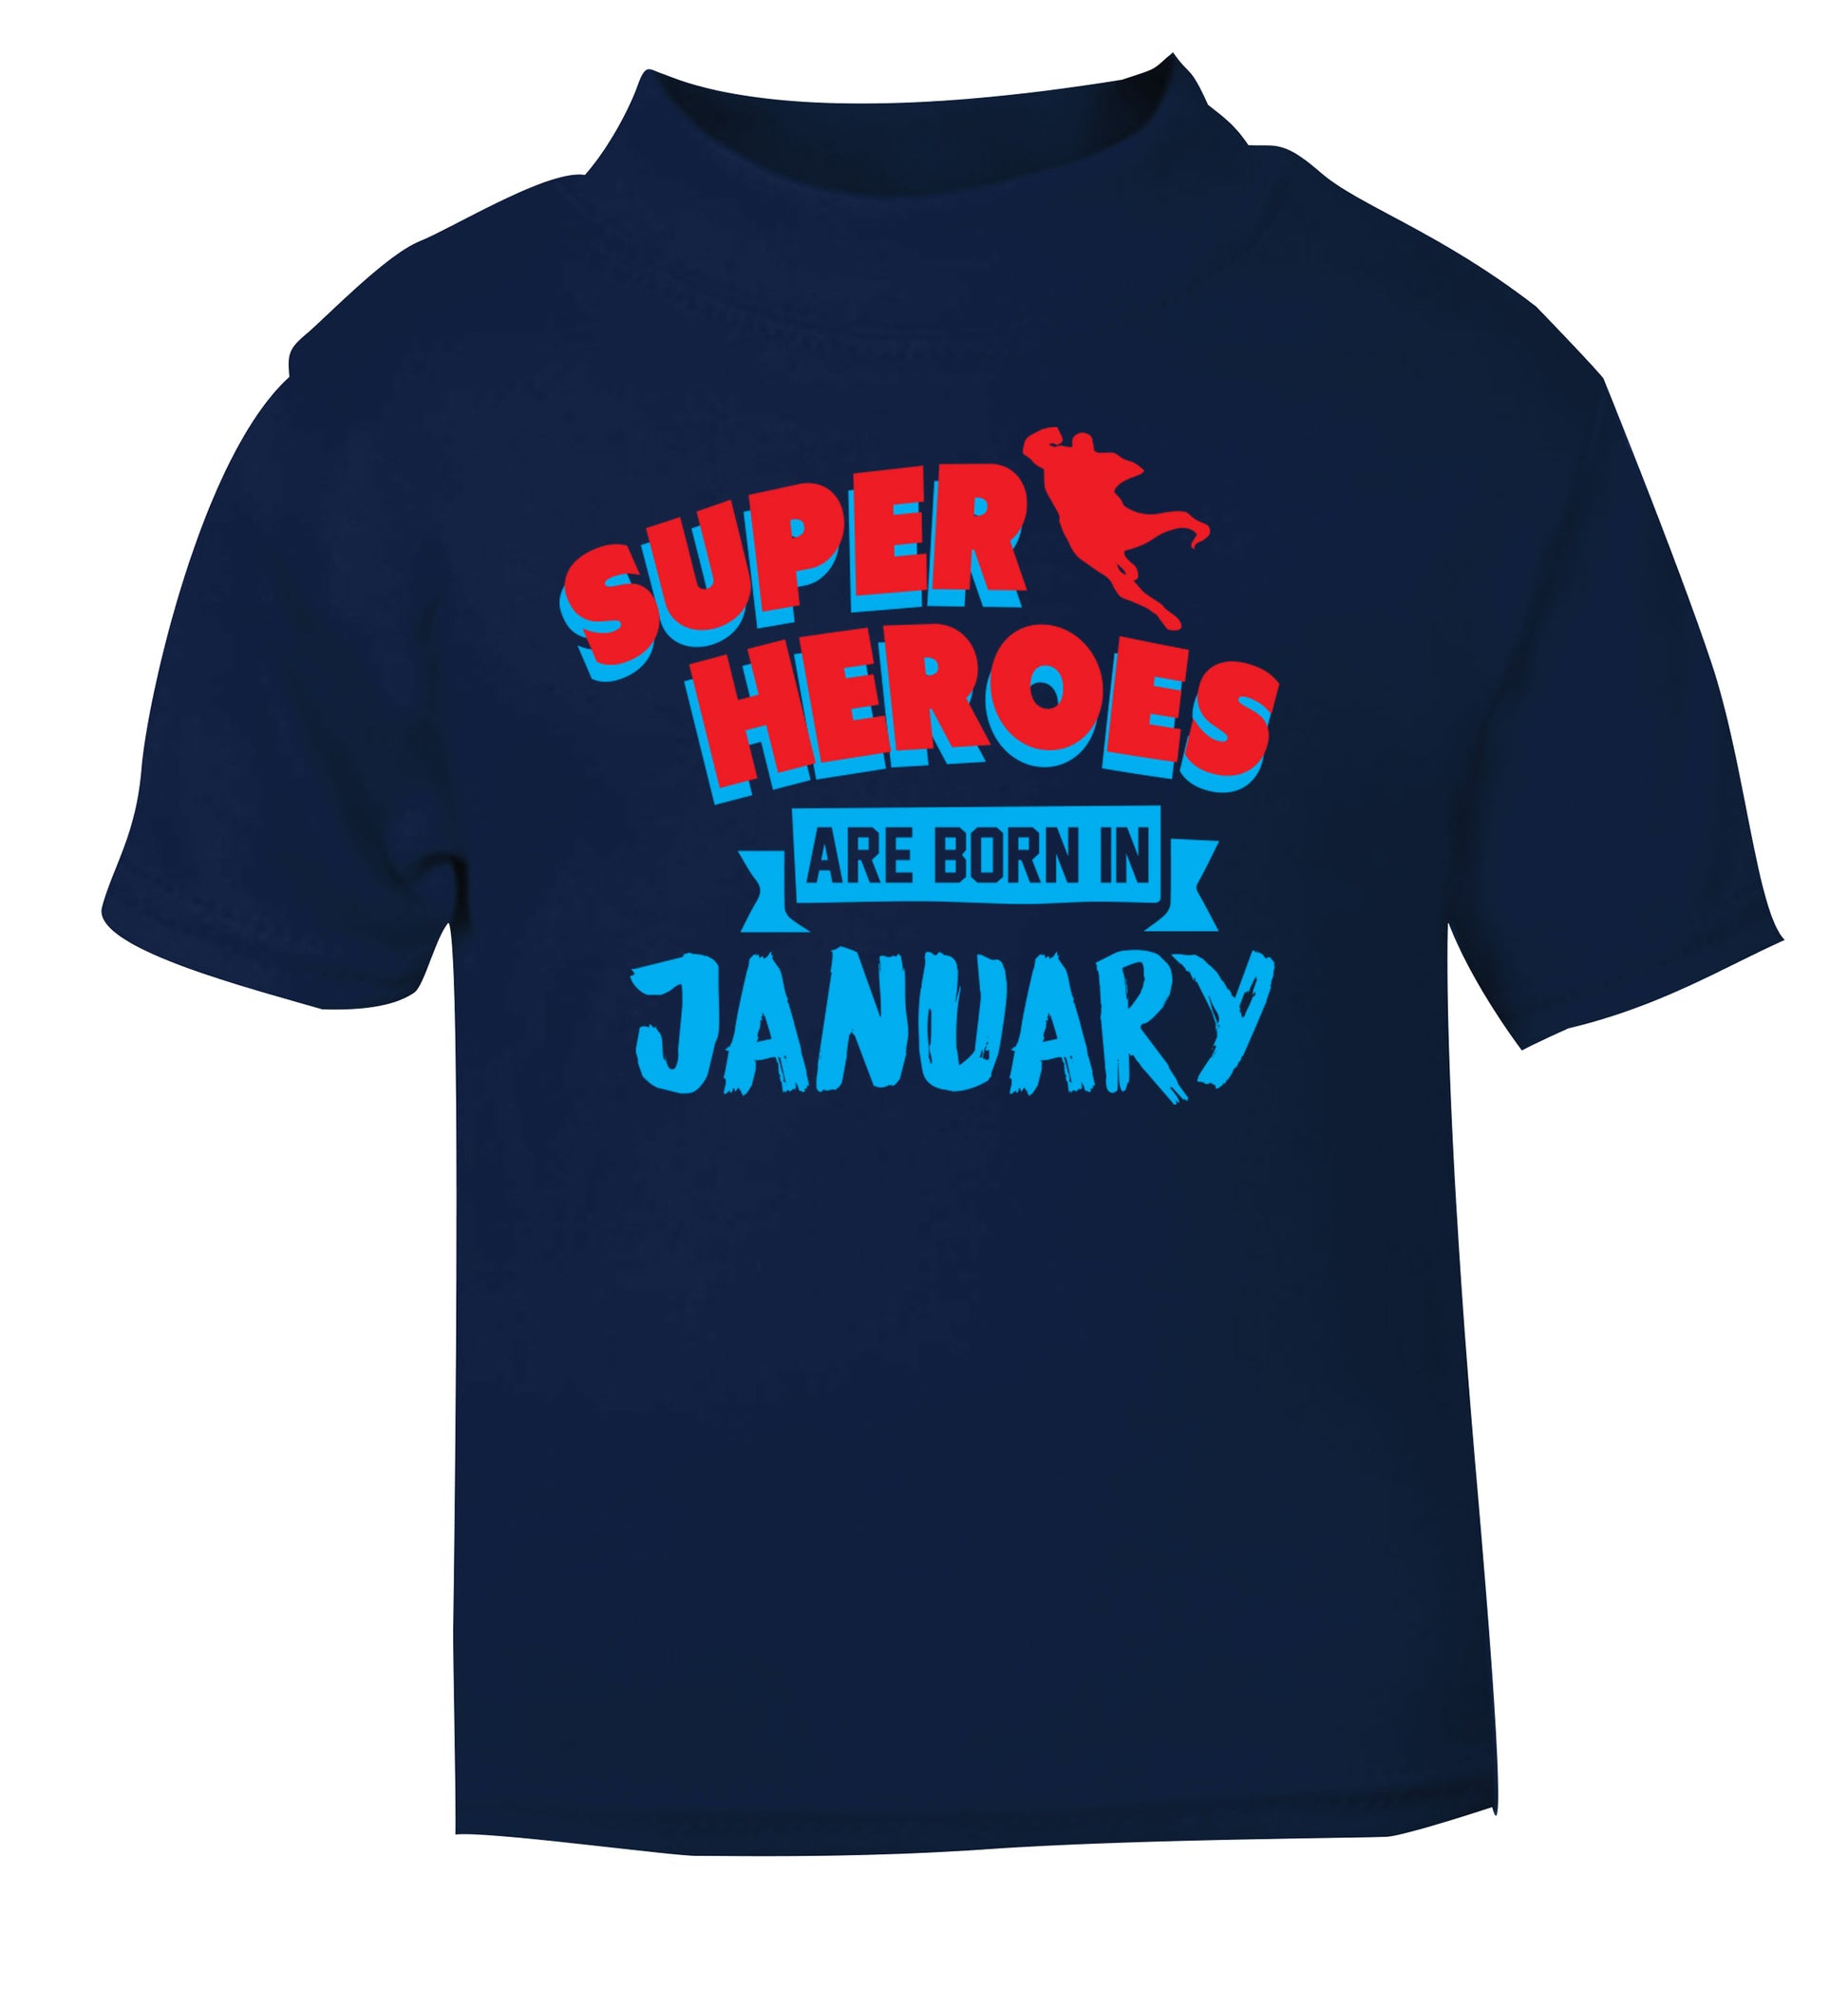 Superheros are born in January navy Baby Toddler Tshirt 2 Years